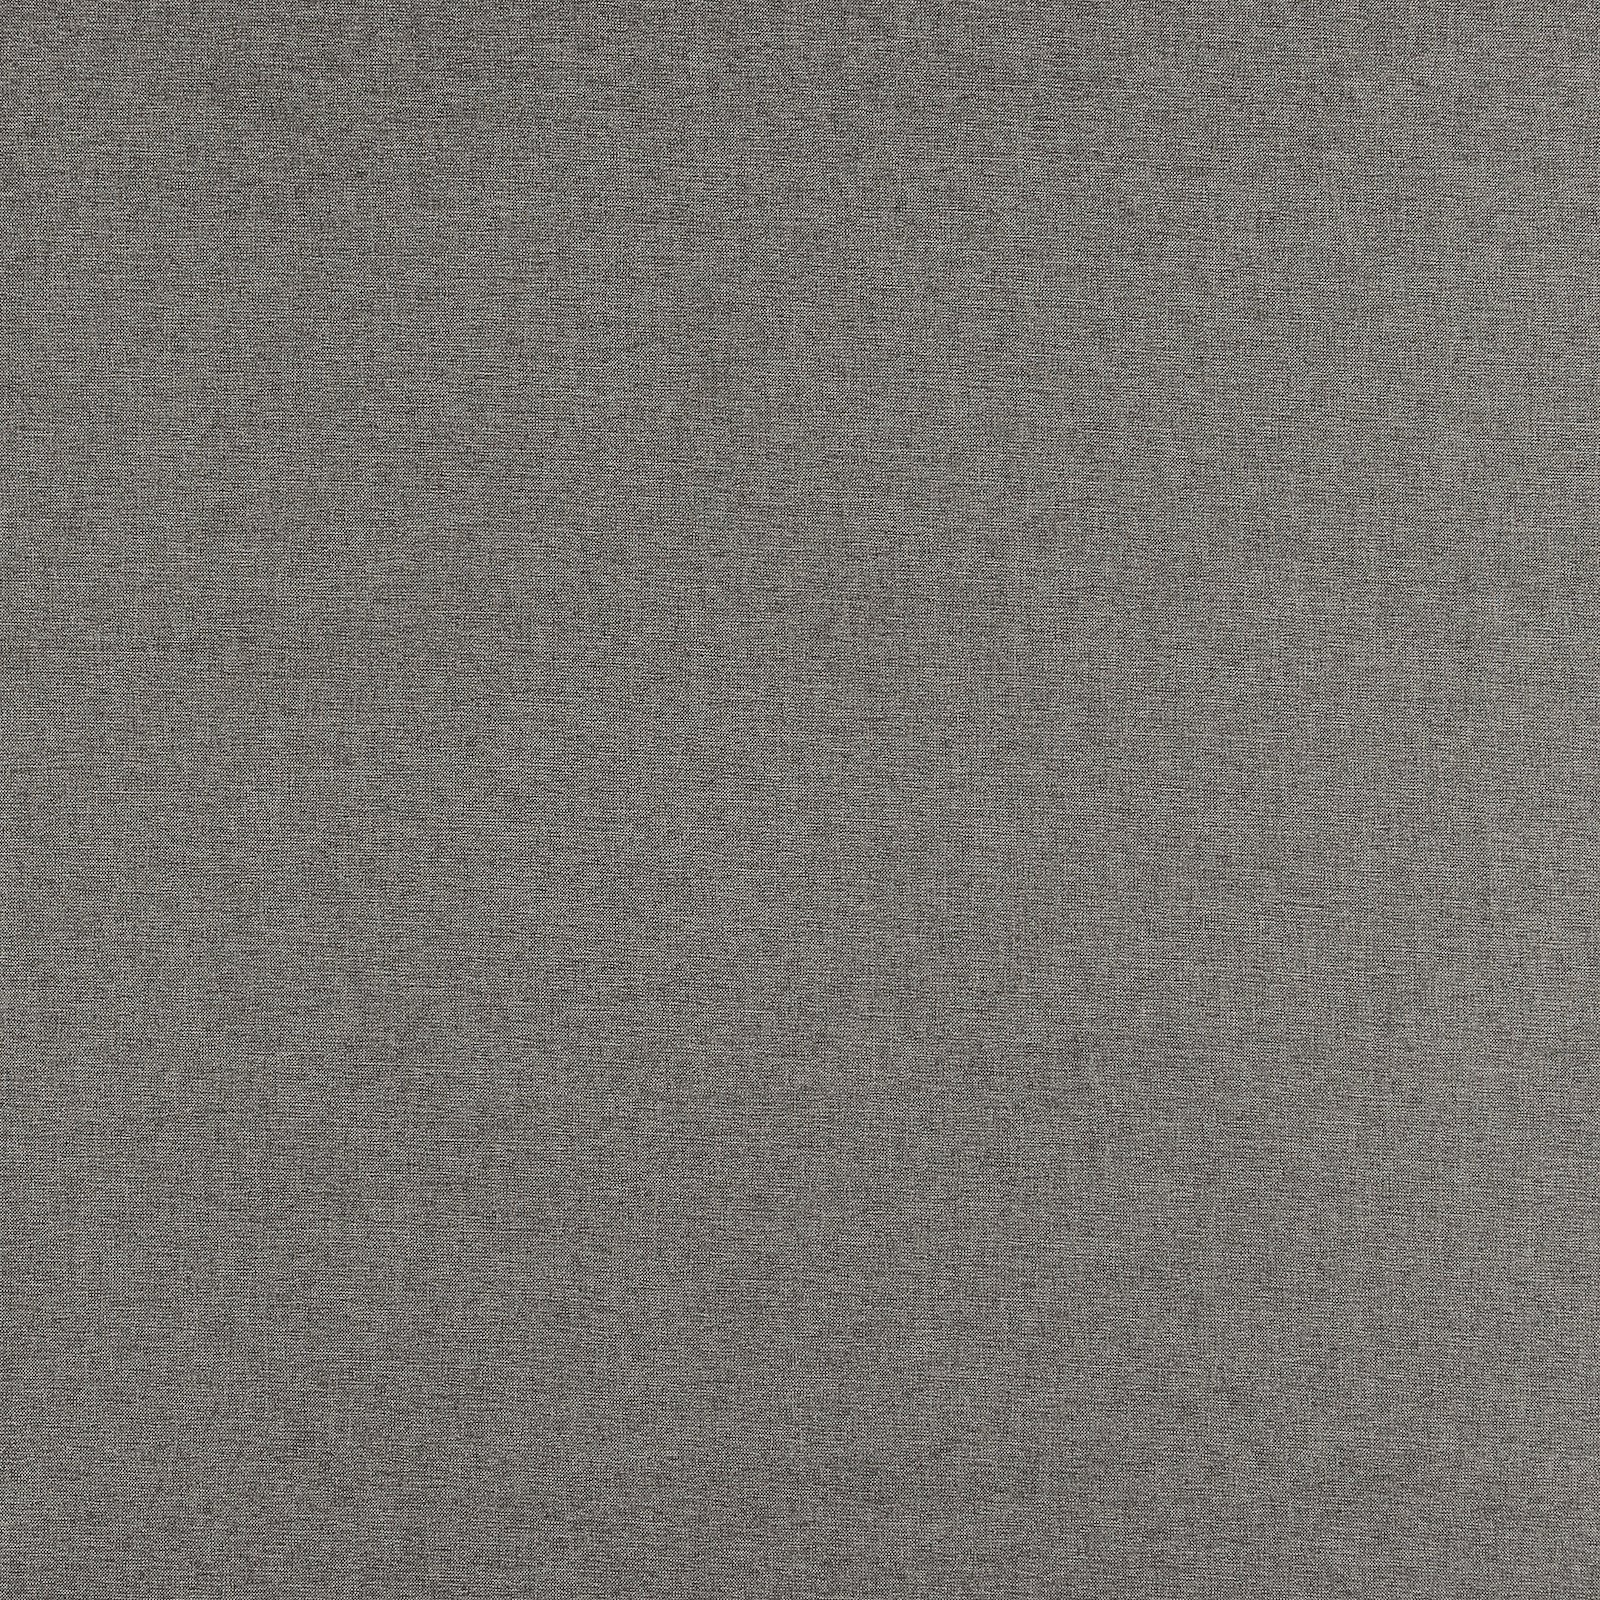 Upholstery texture grey/light grey 822163_pack_solid